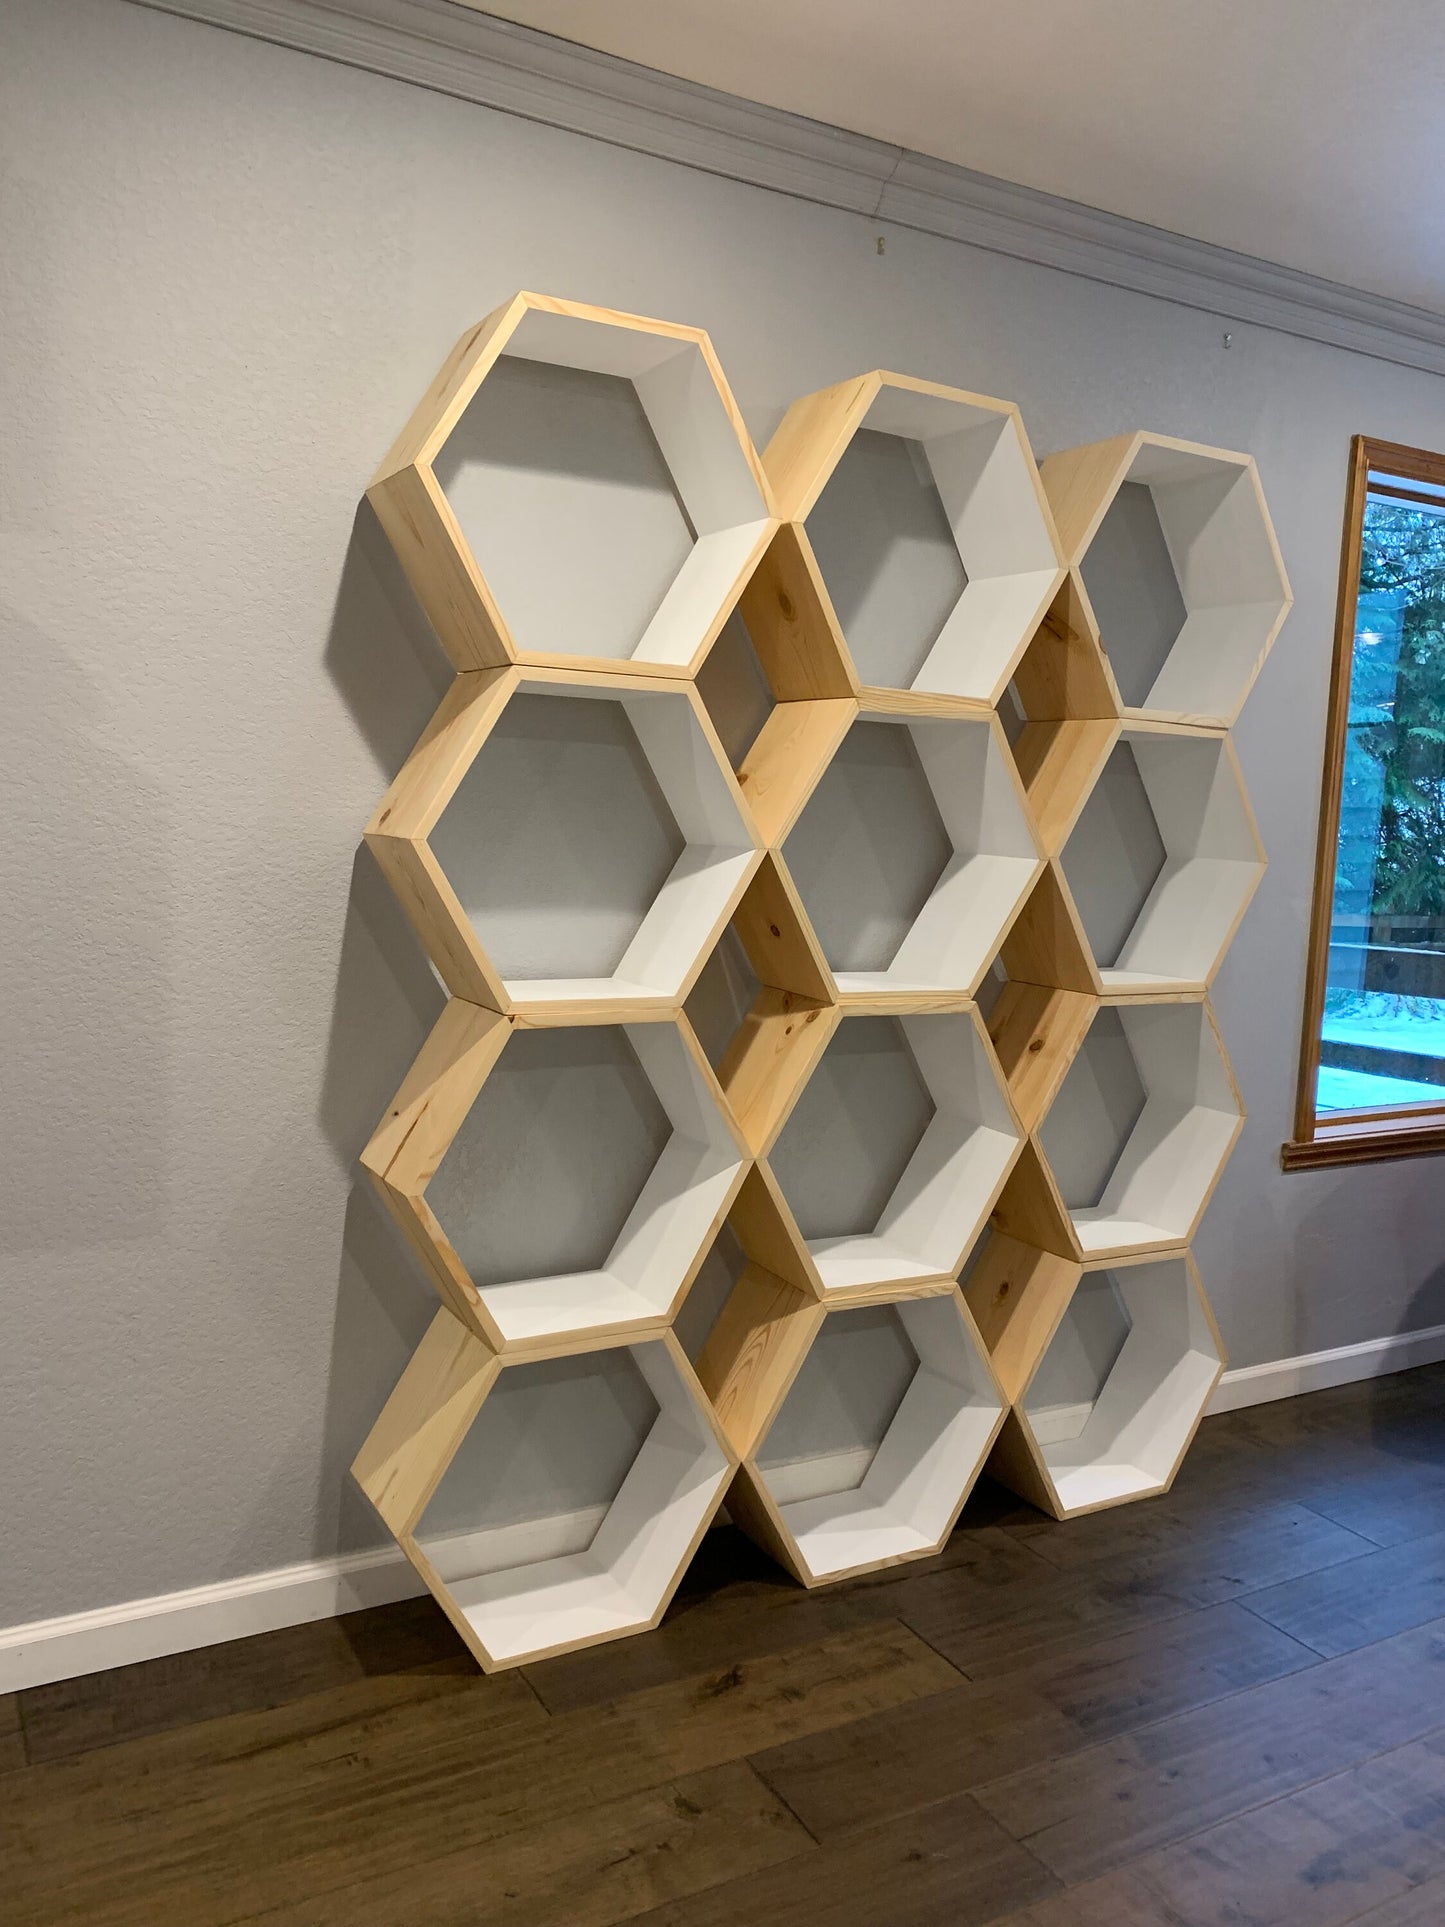 Set of 12 extra Large Hexagon Shelves, Two colors, Honeycomb Shelf, Honeycomb Shelves, Floating Hexagon Shelf, Floating Honeycomb Shelves